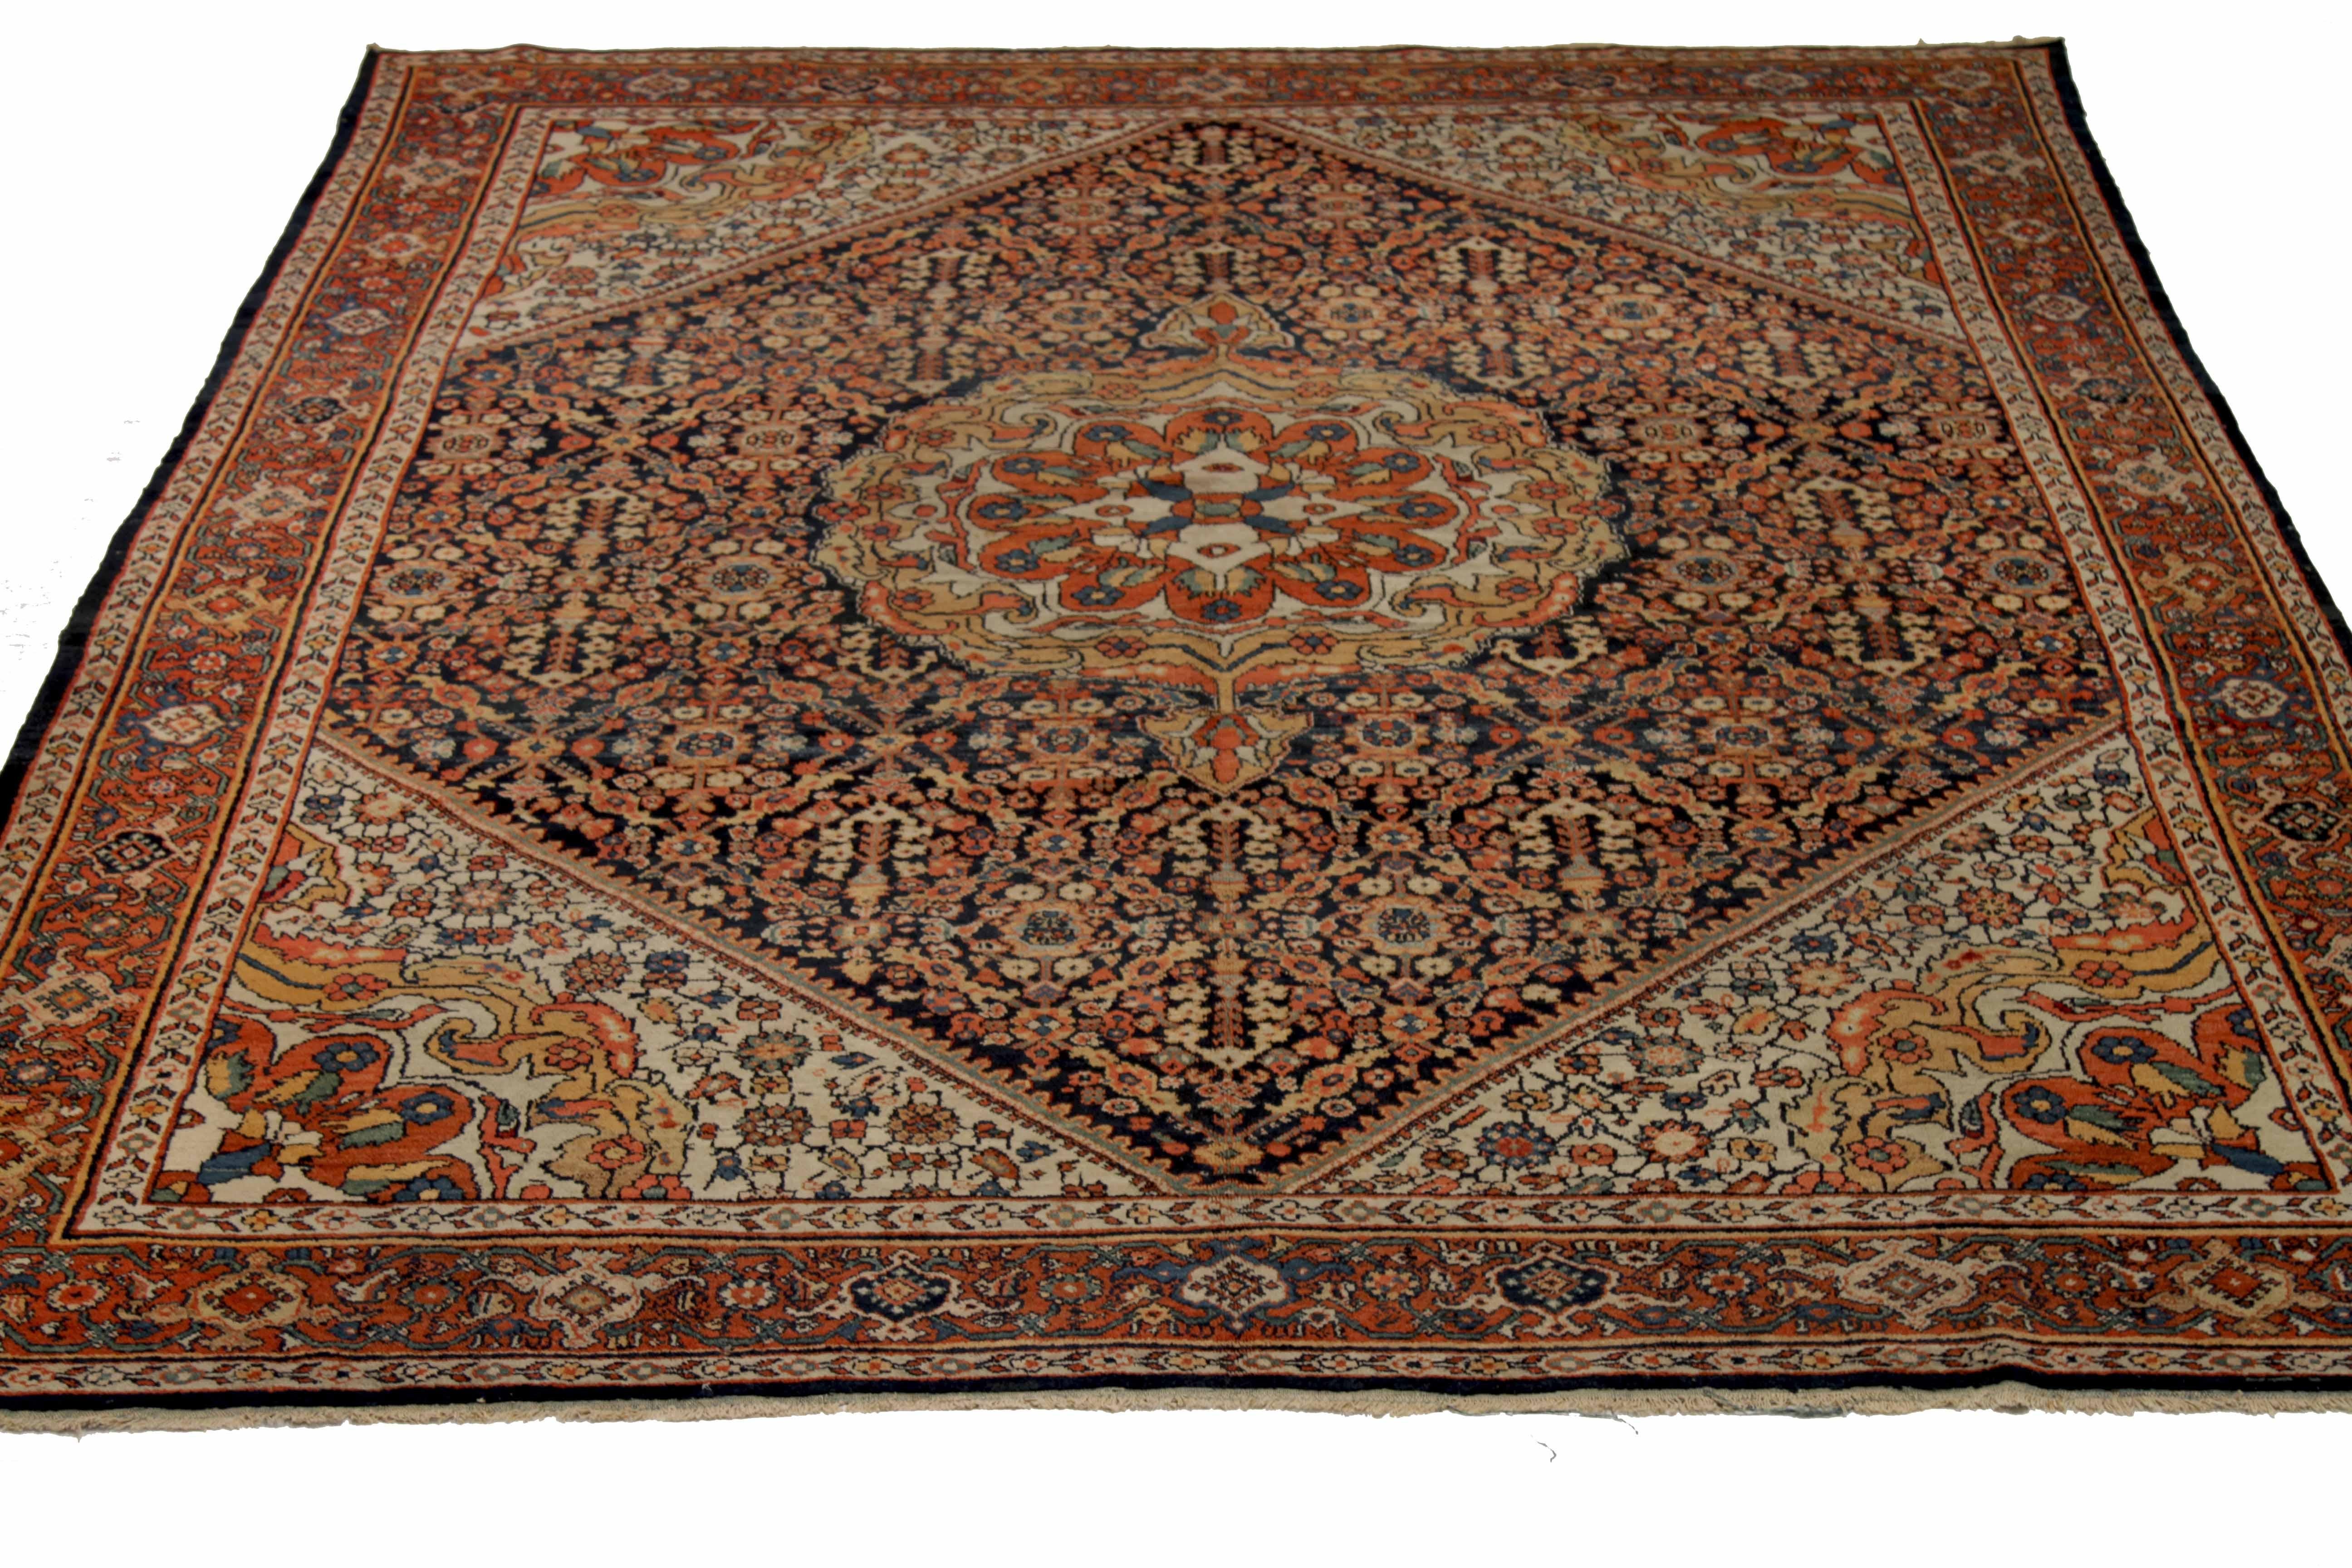 Antique area rug handwoven from the finest sheep’s wool. It’s colored with all-natural vegetable dyes that are safe for humans and pets. It’s a traditional Sultanabad design handwoven by expert artisans. It’s a lovely area rug that can be